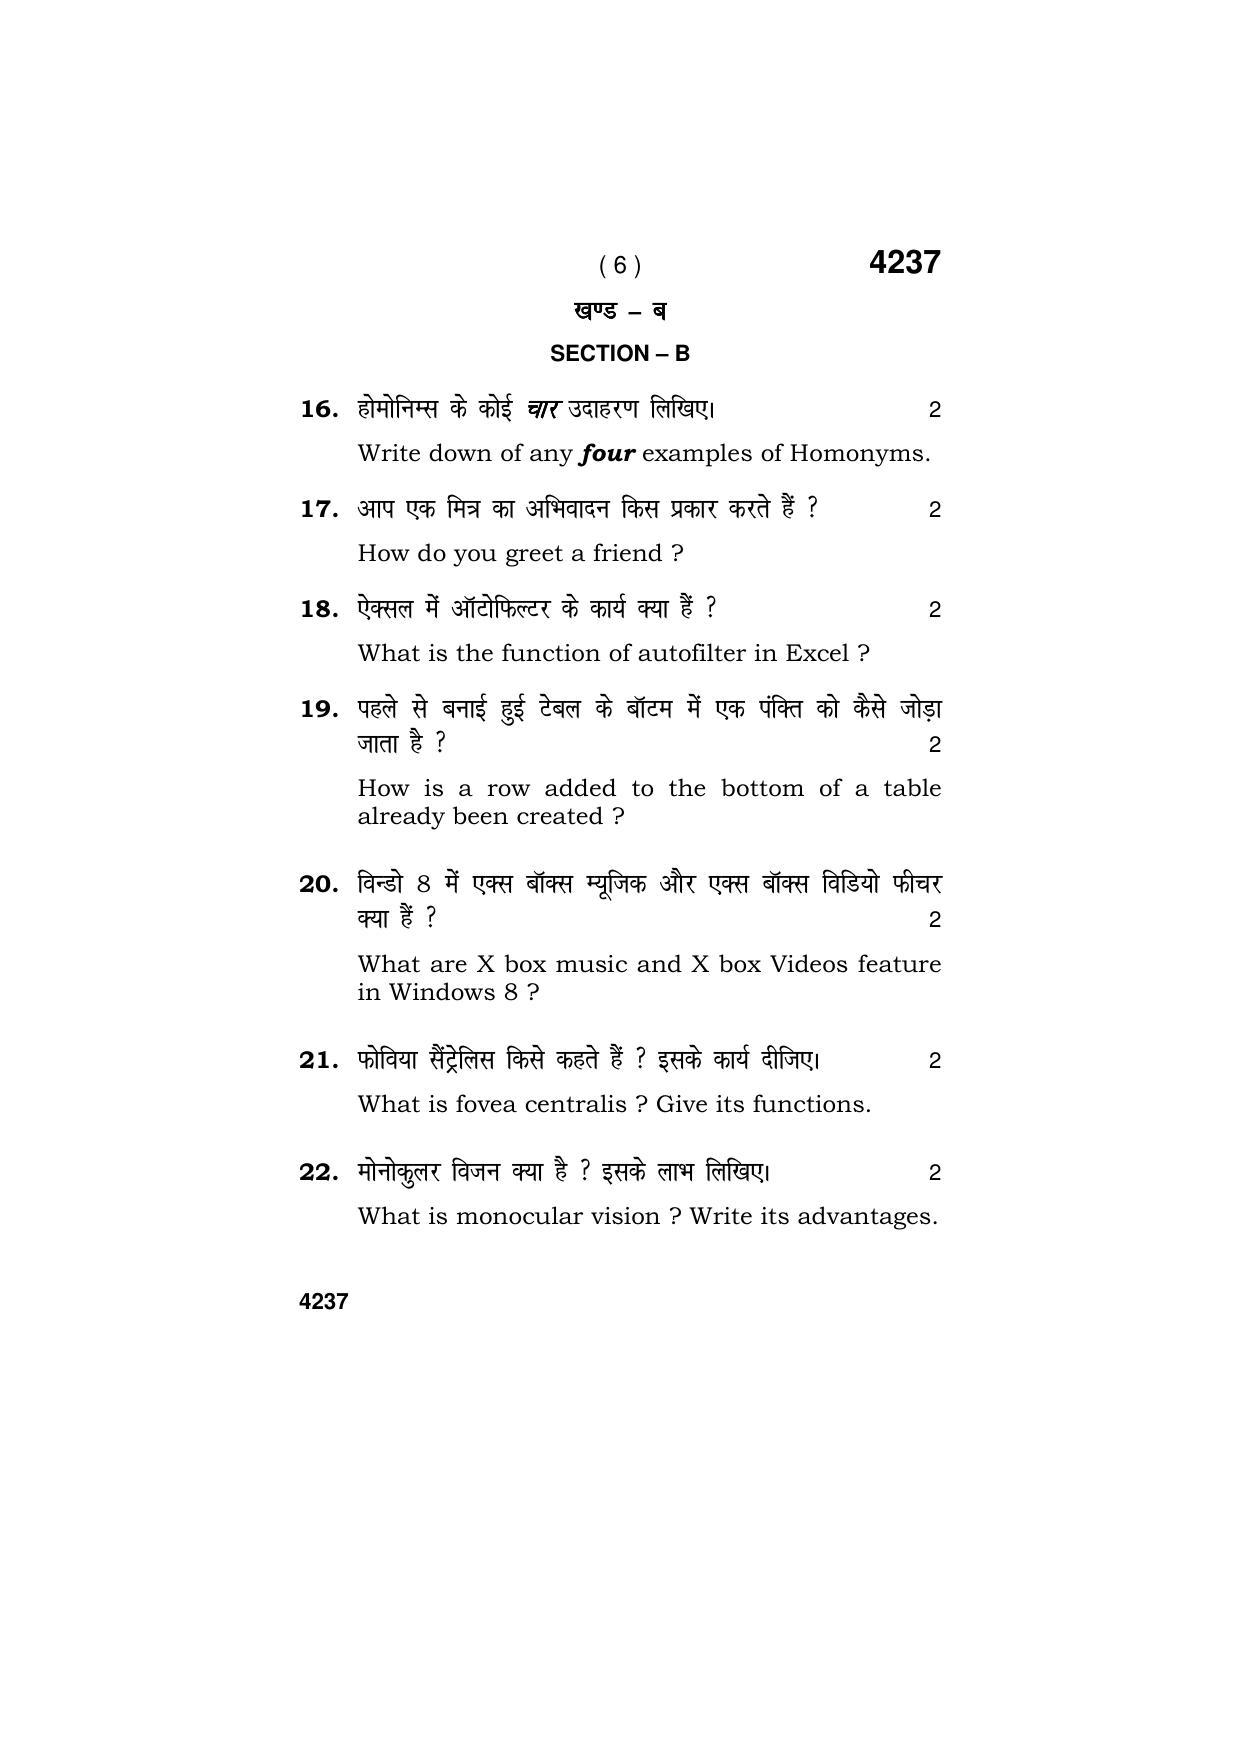 Haryana Board HBSE Class 10 Vision Technician 2019 Question Paper - Page 6